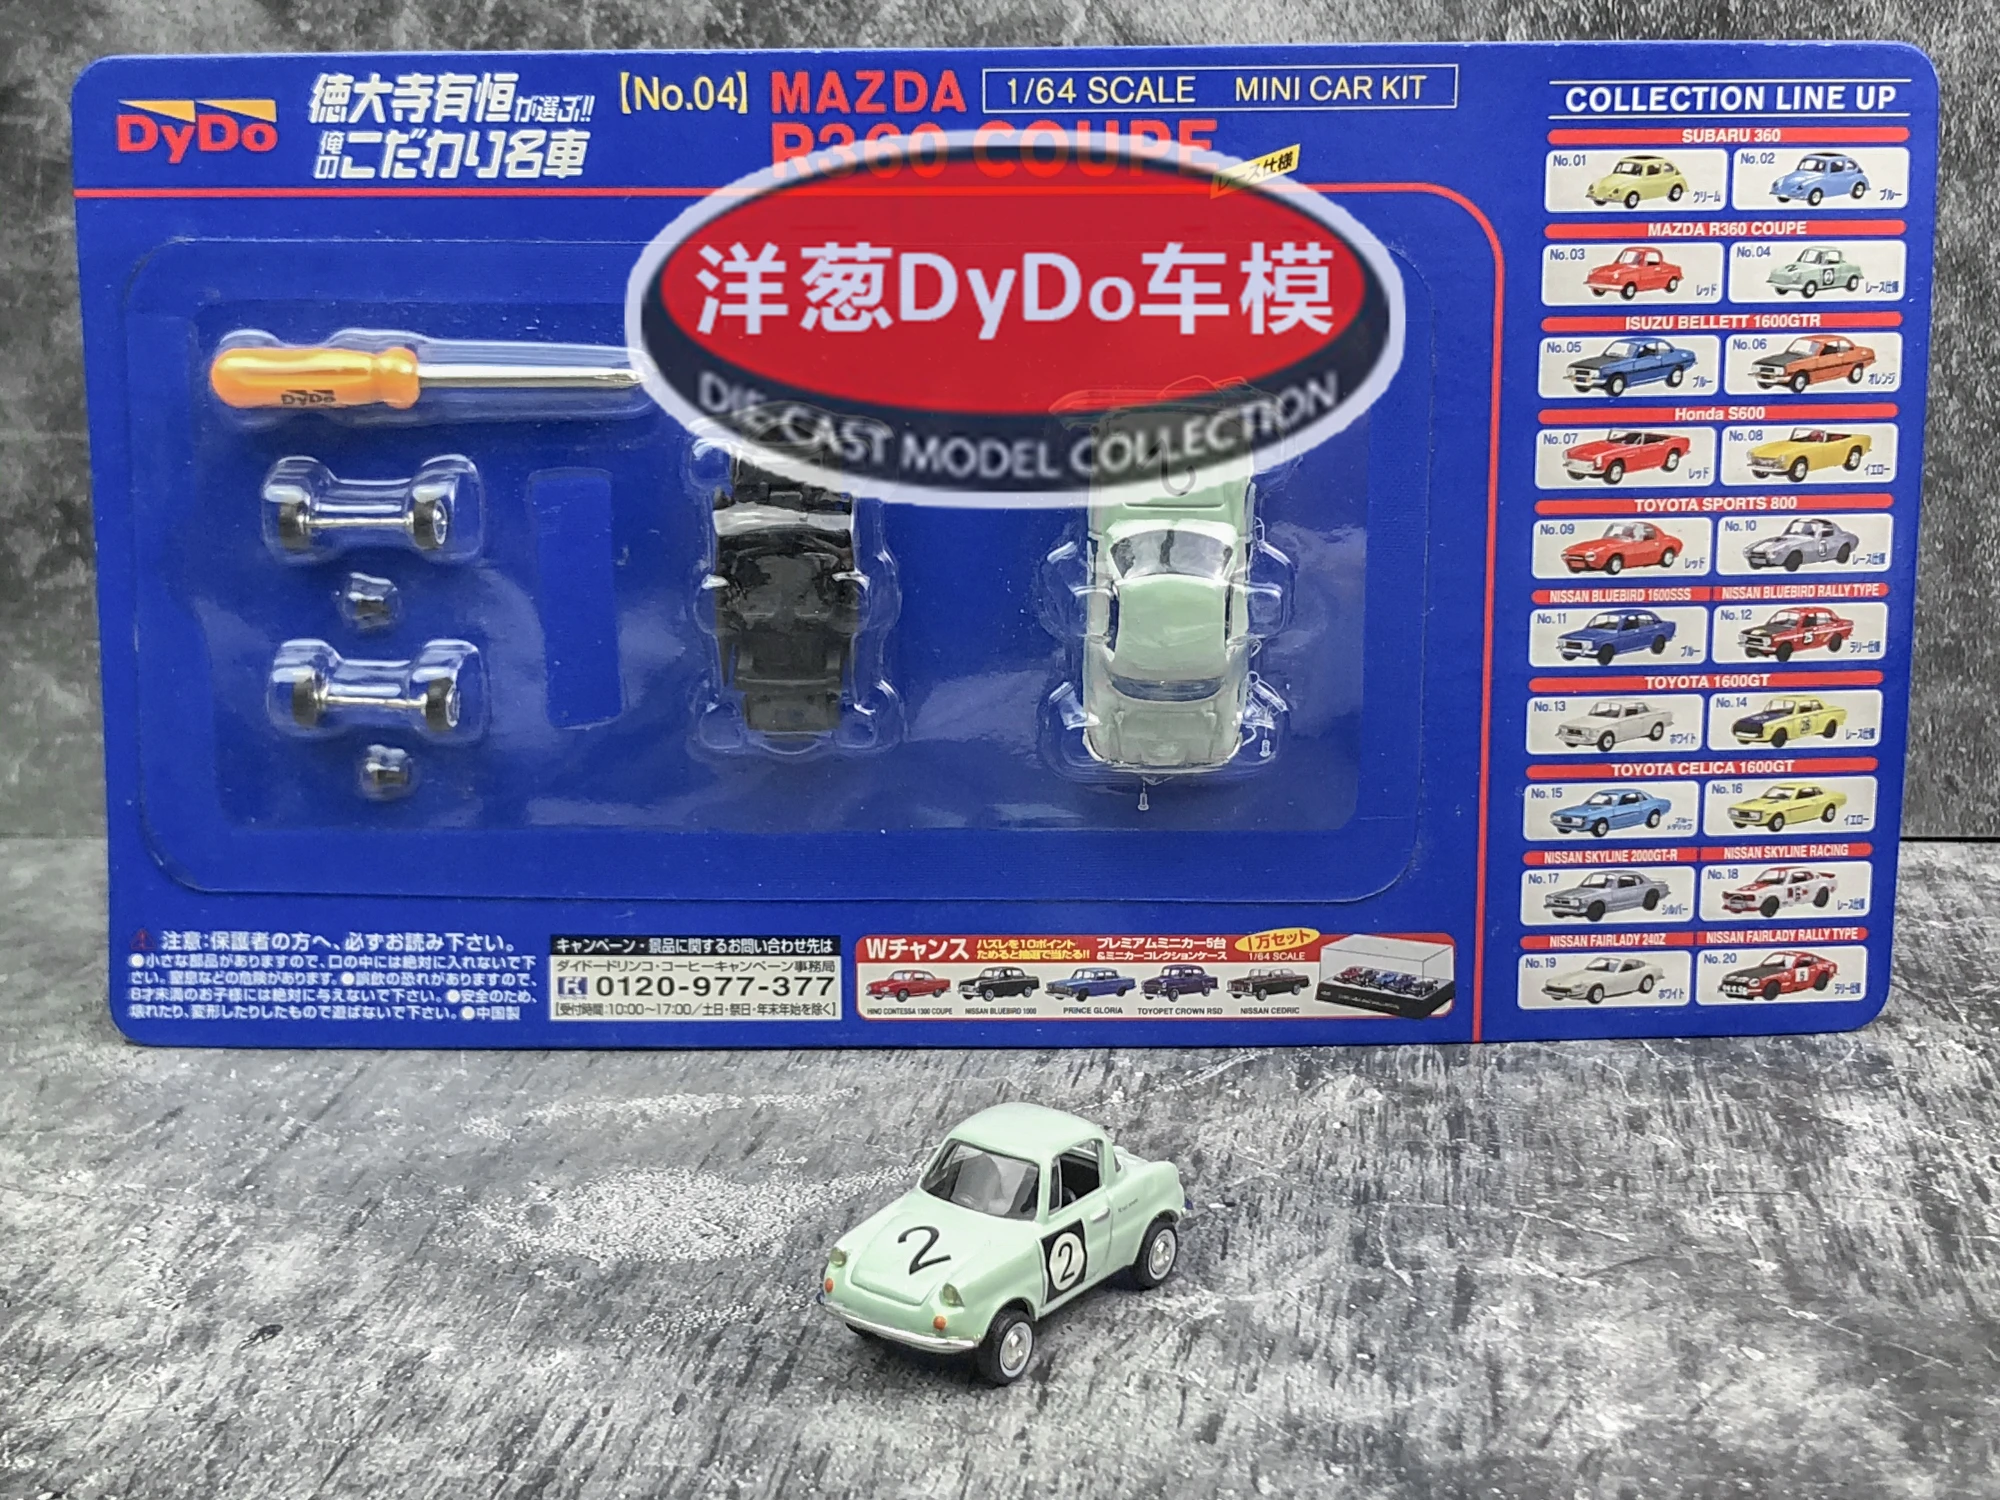 

1:64 Kyosho DyDo MAZDA R360 Collection of die-cast alloy assembled car decoration model toys 1960